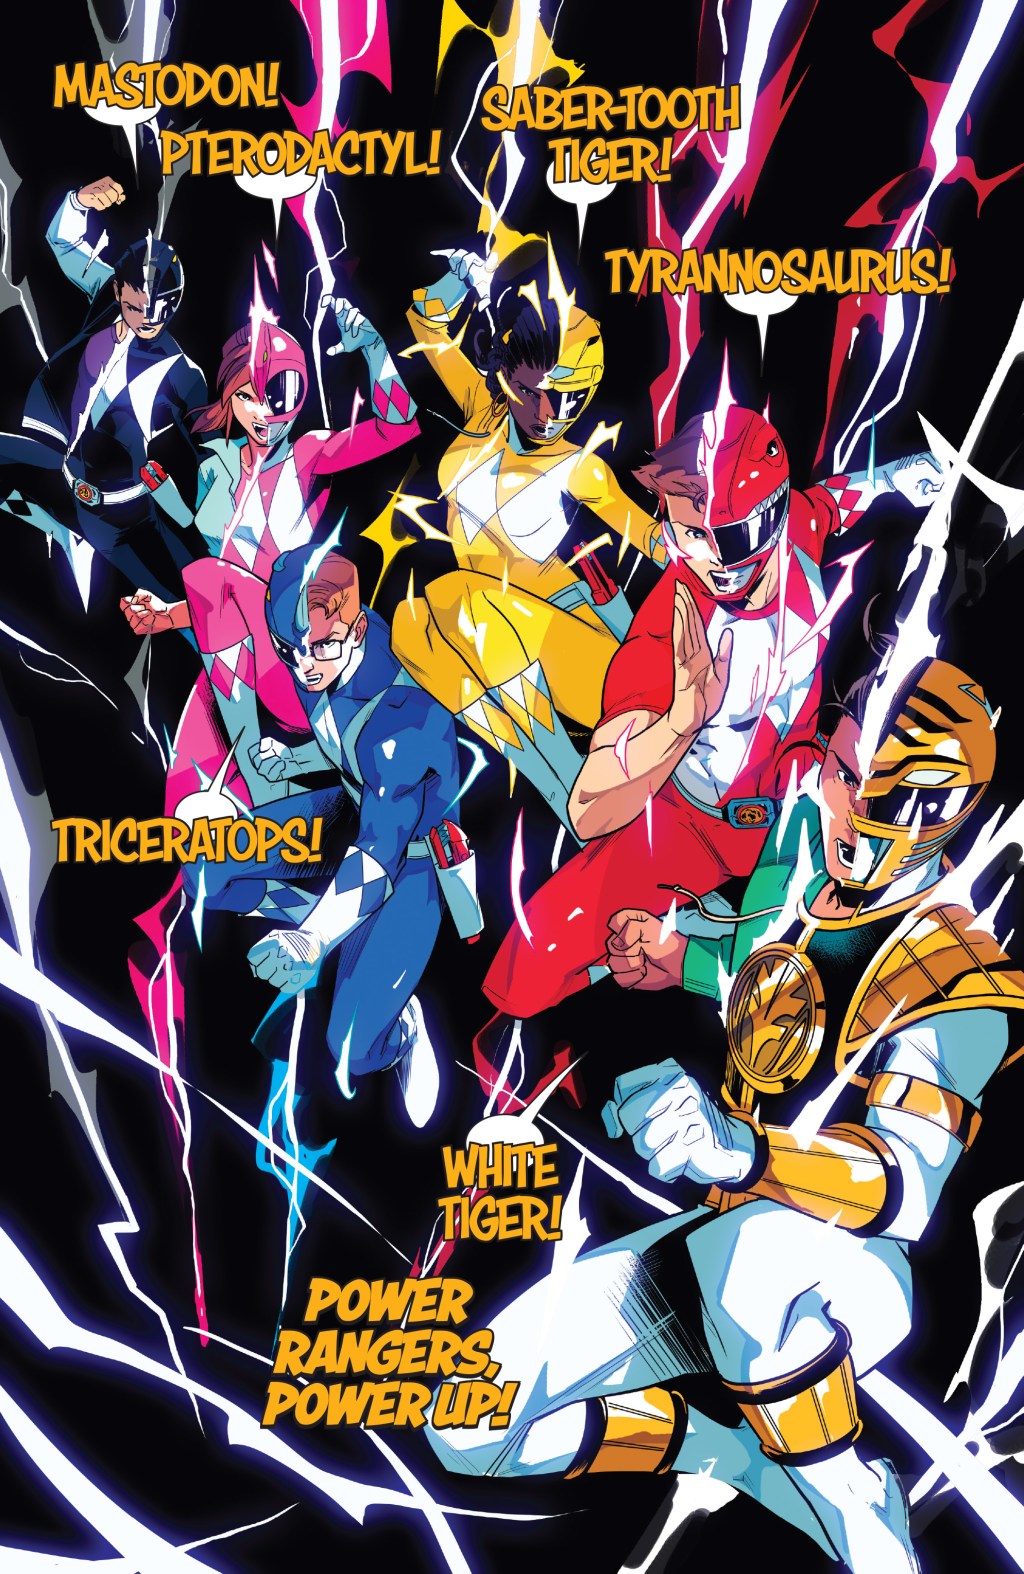 The titular team taps into the Morphin' Grid in Mighty Morphin Power Rangers Vol. 2 #1 (2020), BOOM! Studios. Words by Ryan Parrott, art by Marco Renna, Walter Baiamonte, Katia Ranalli, and Ed Dukeshire.